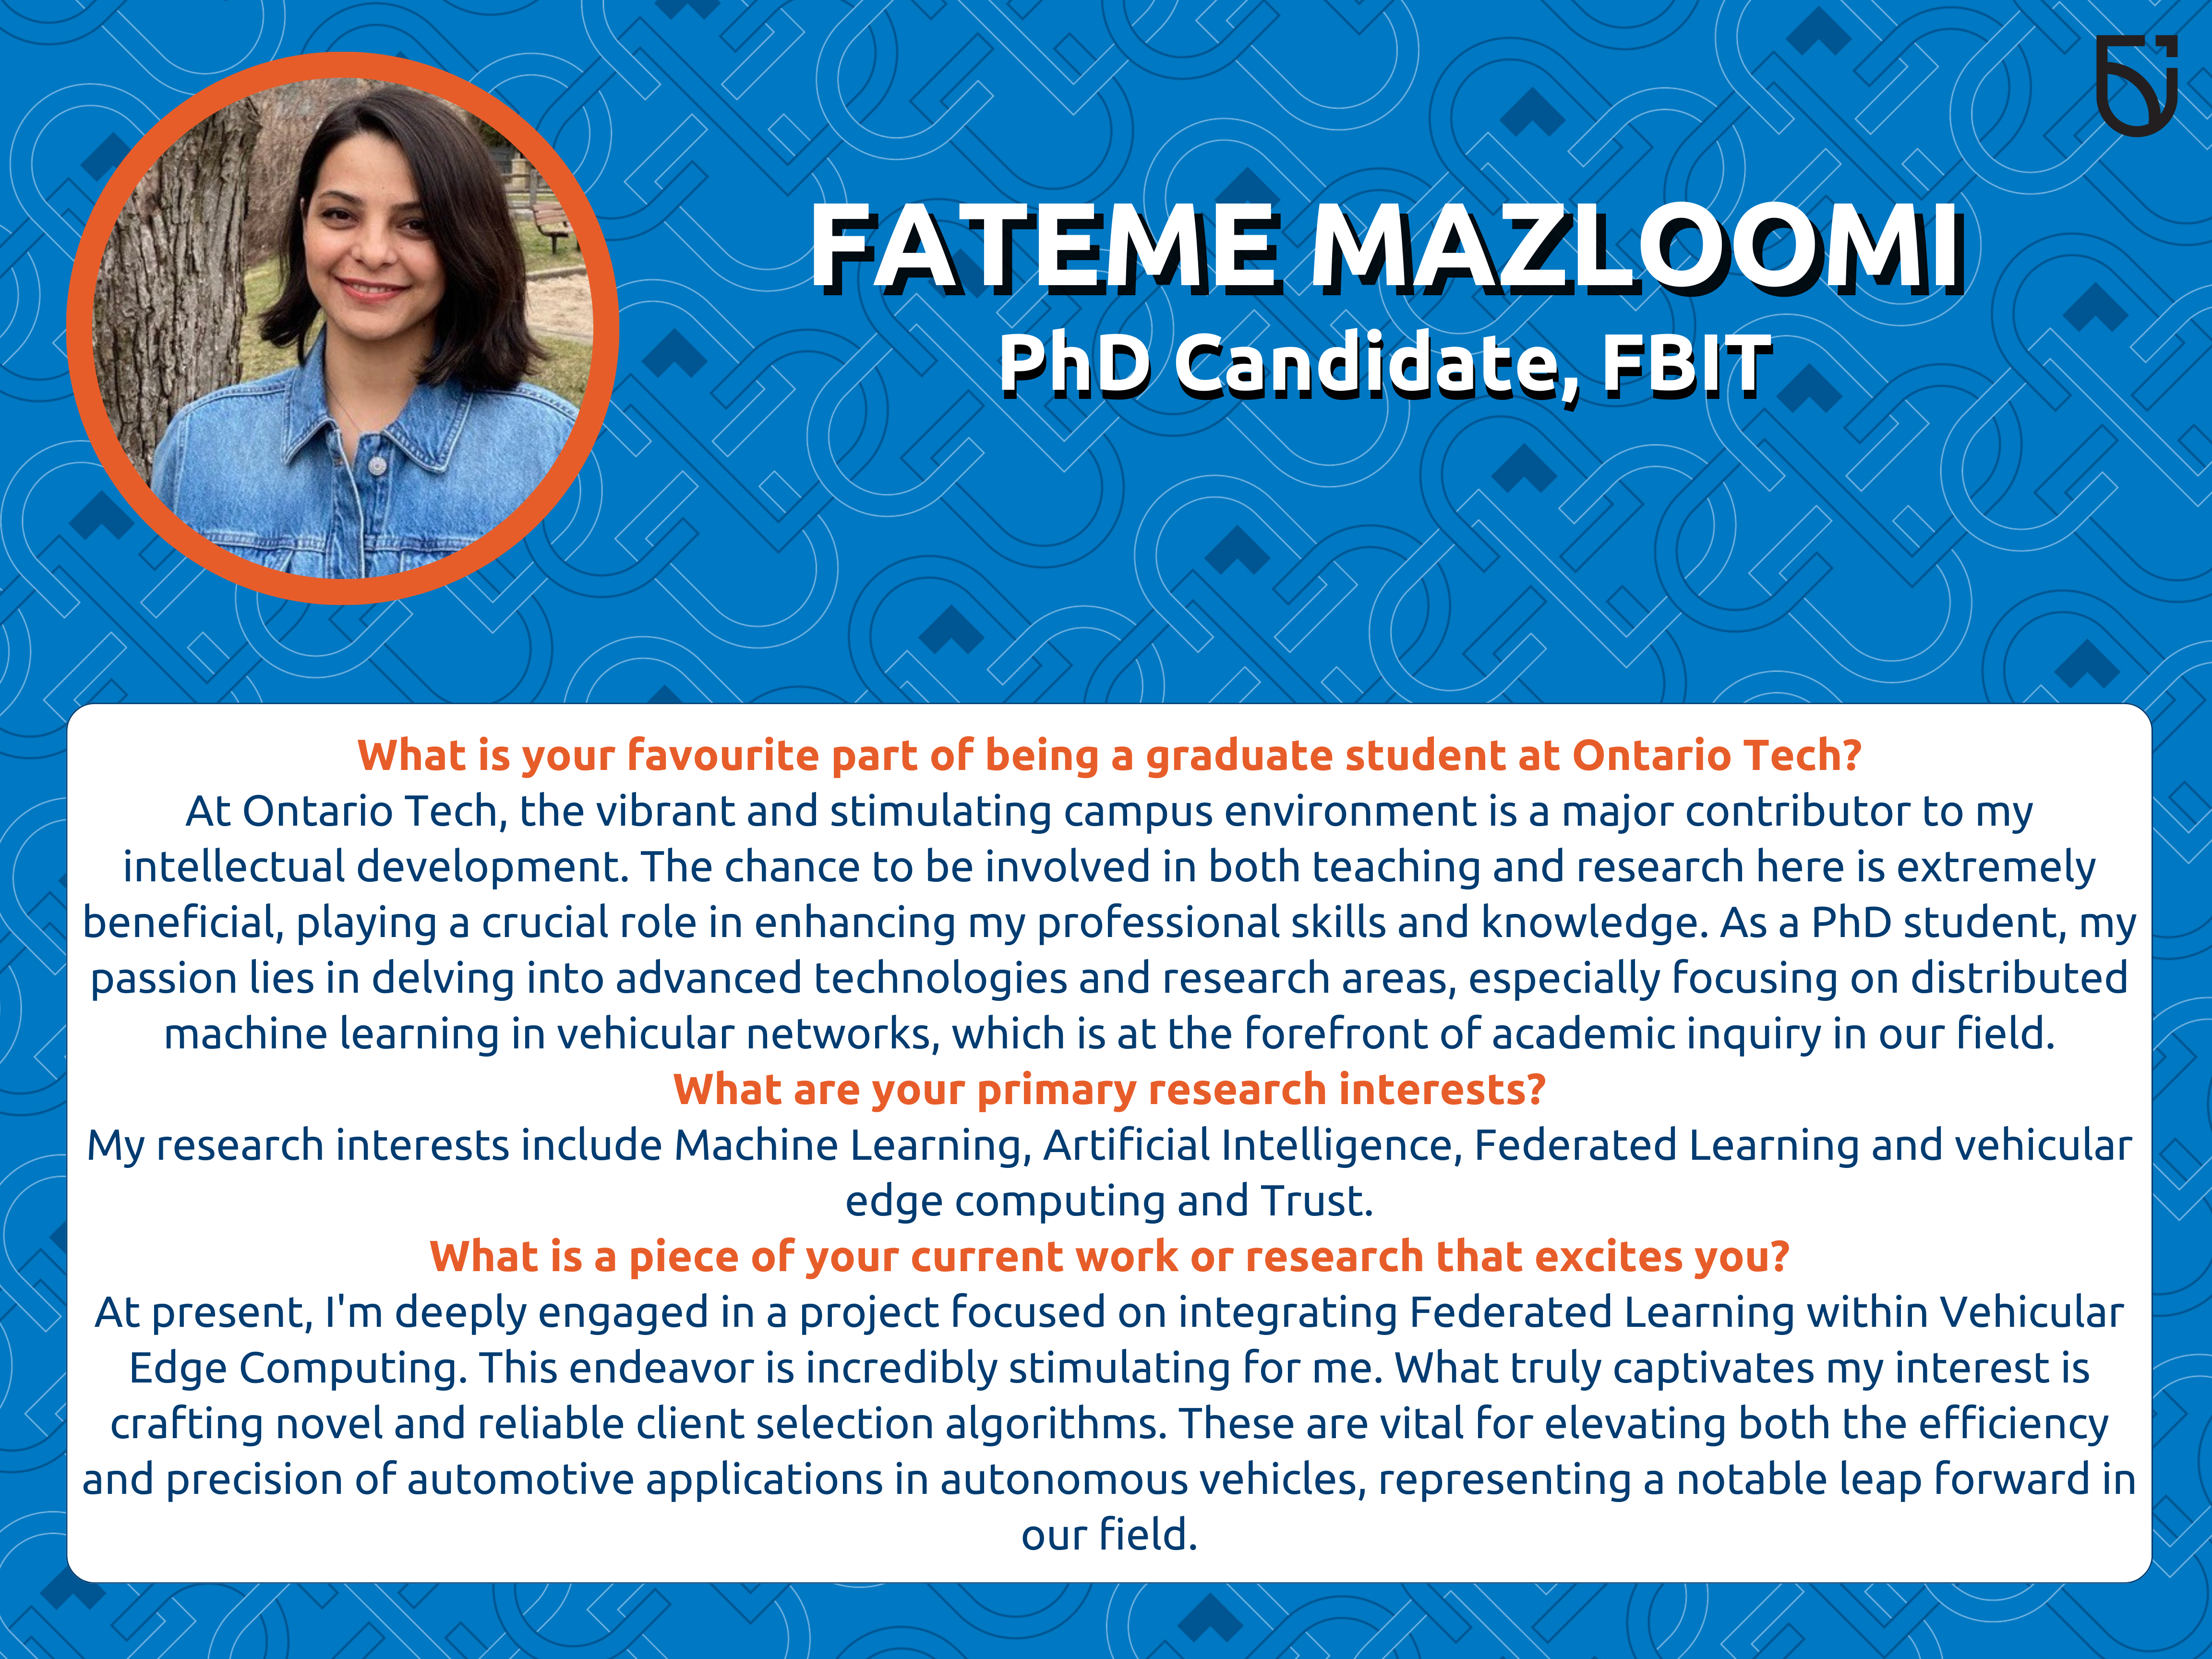 This photo is a Women’s Wednesday feature of Fateme Mazloomi, a PhD student in the Faculty of Business and IT.